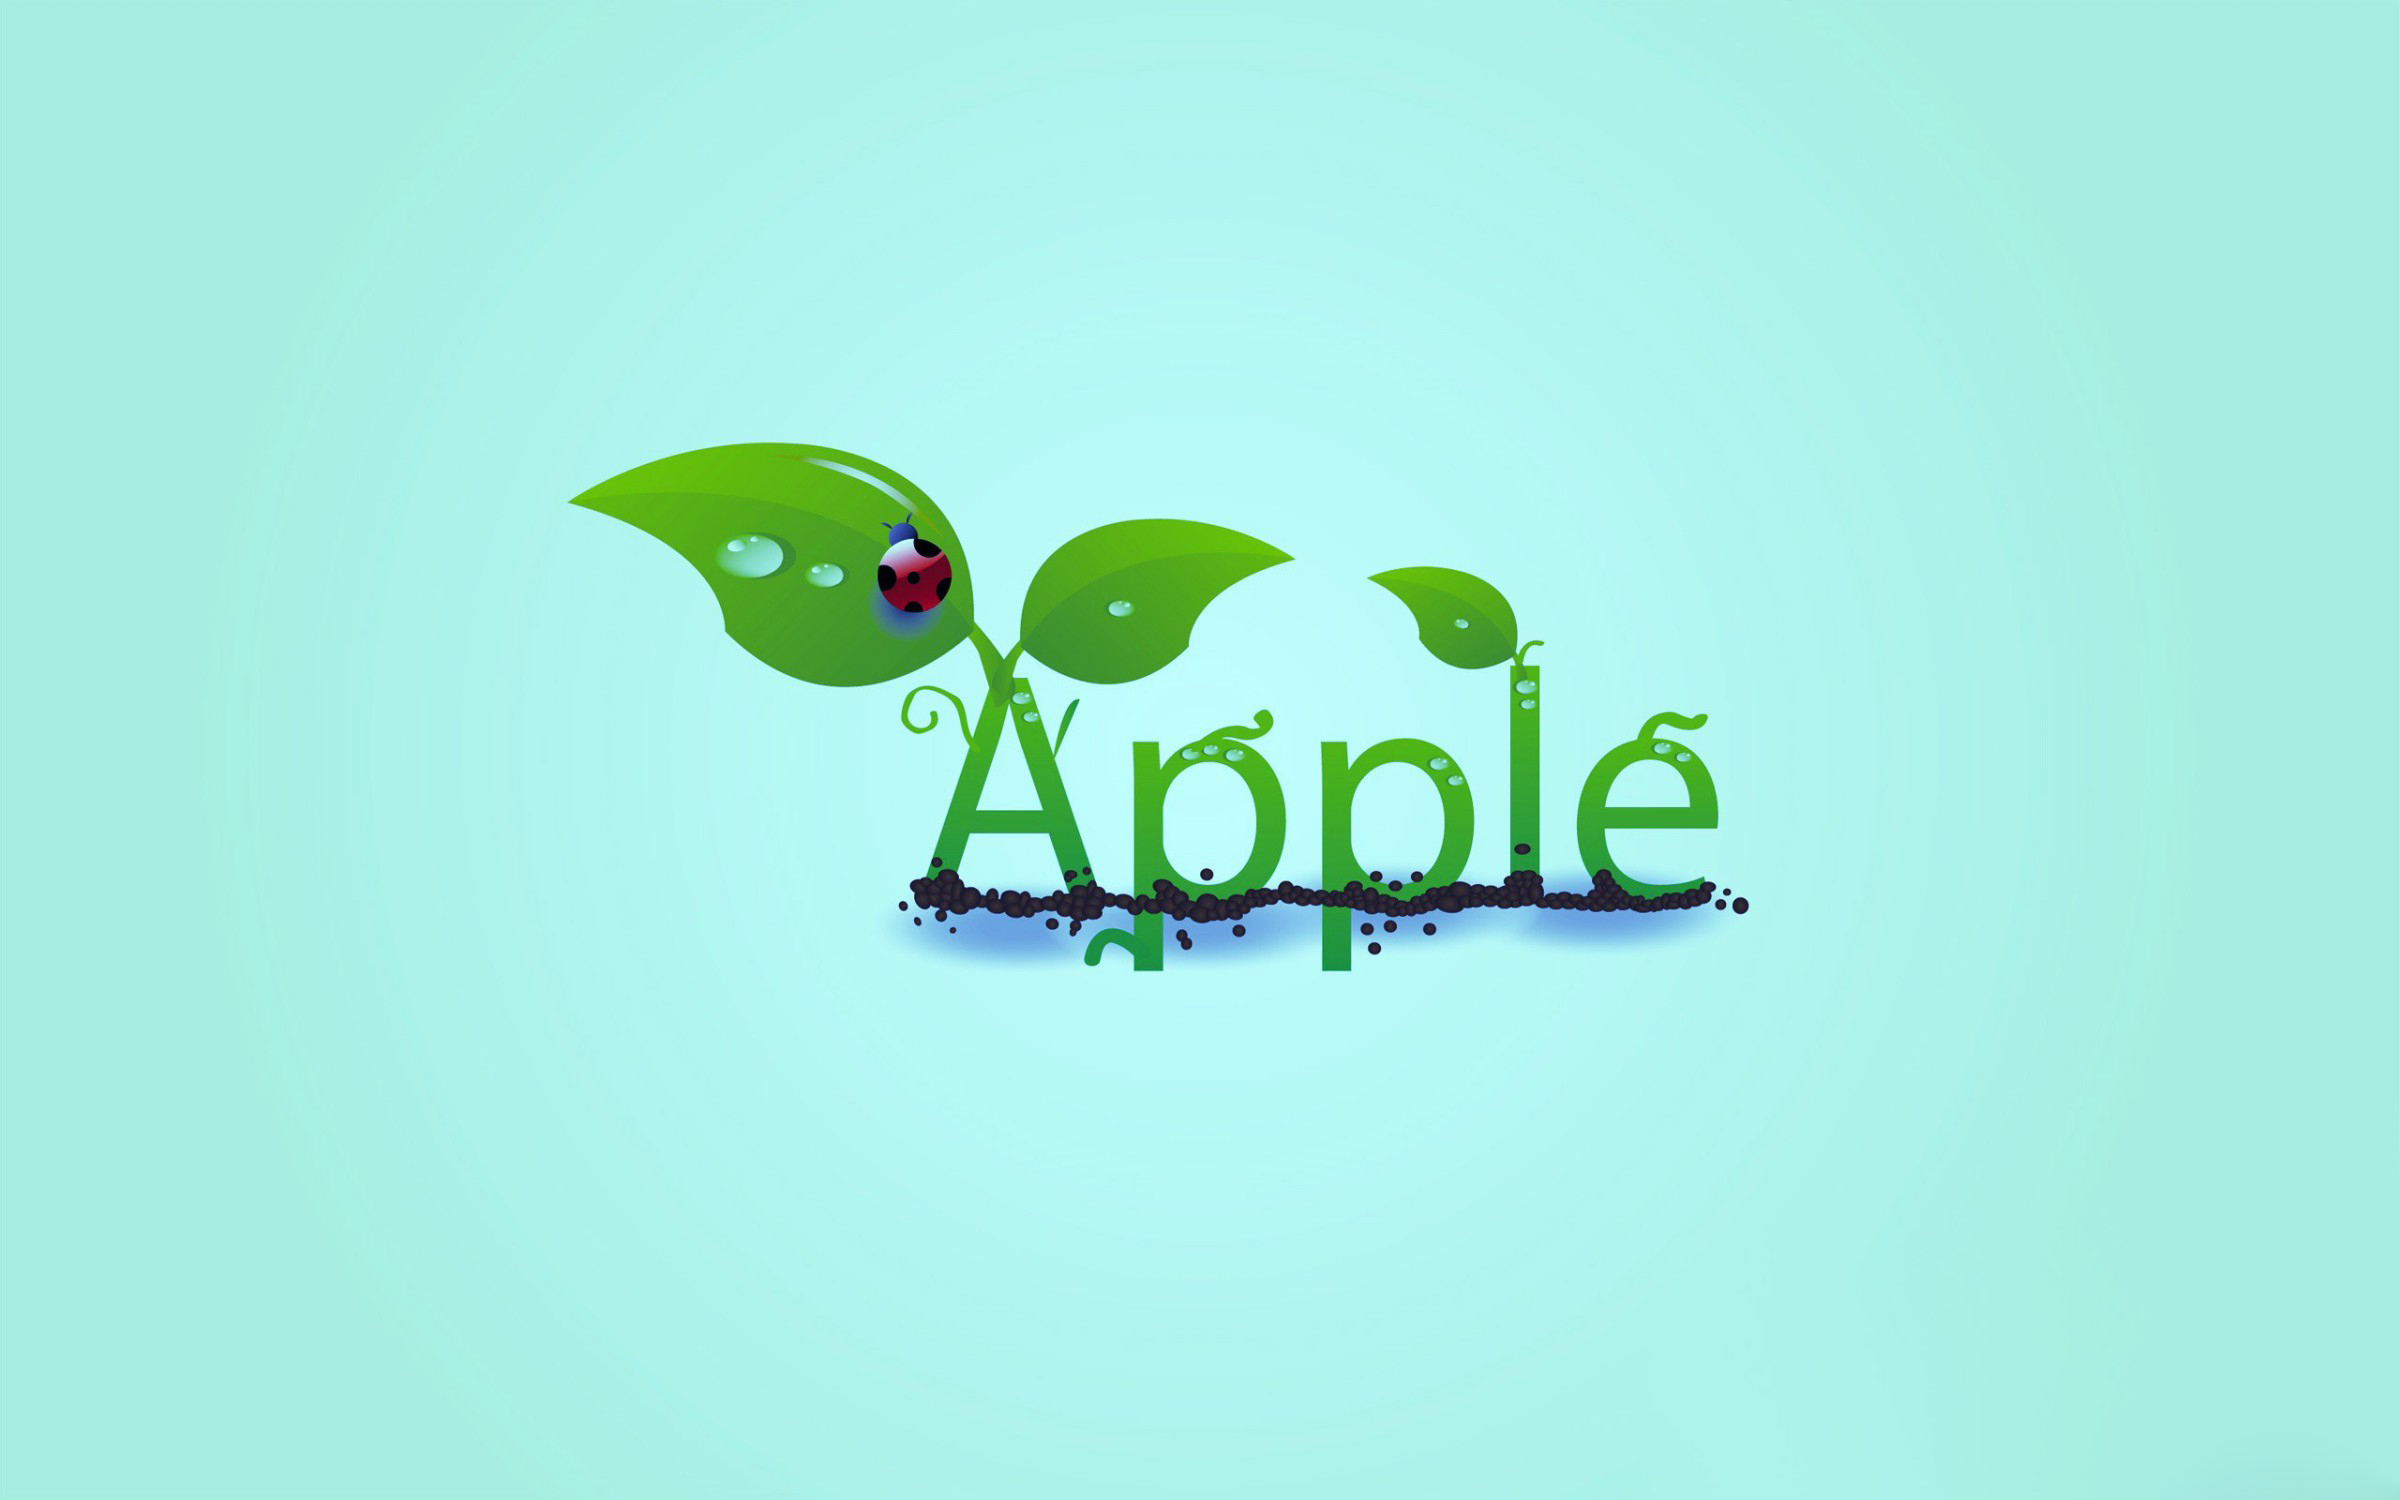 Air Green Apple Logo Free Awesome Image For Mobile